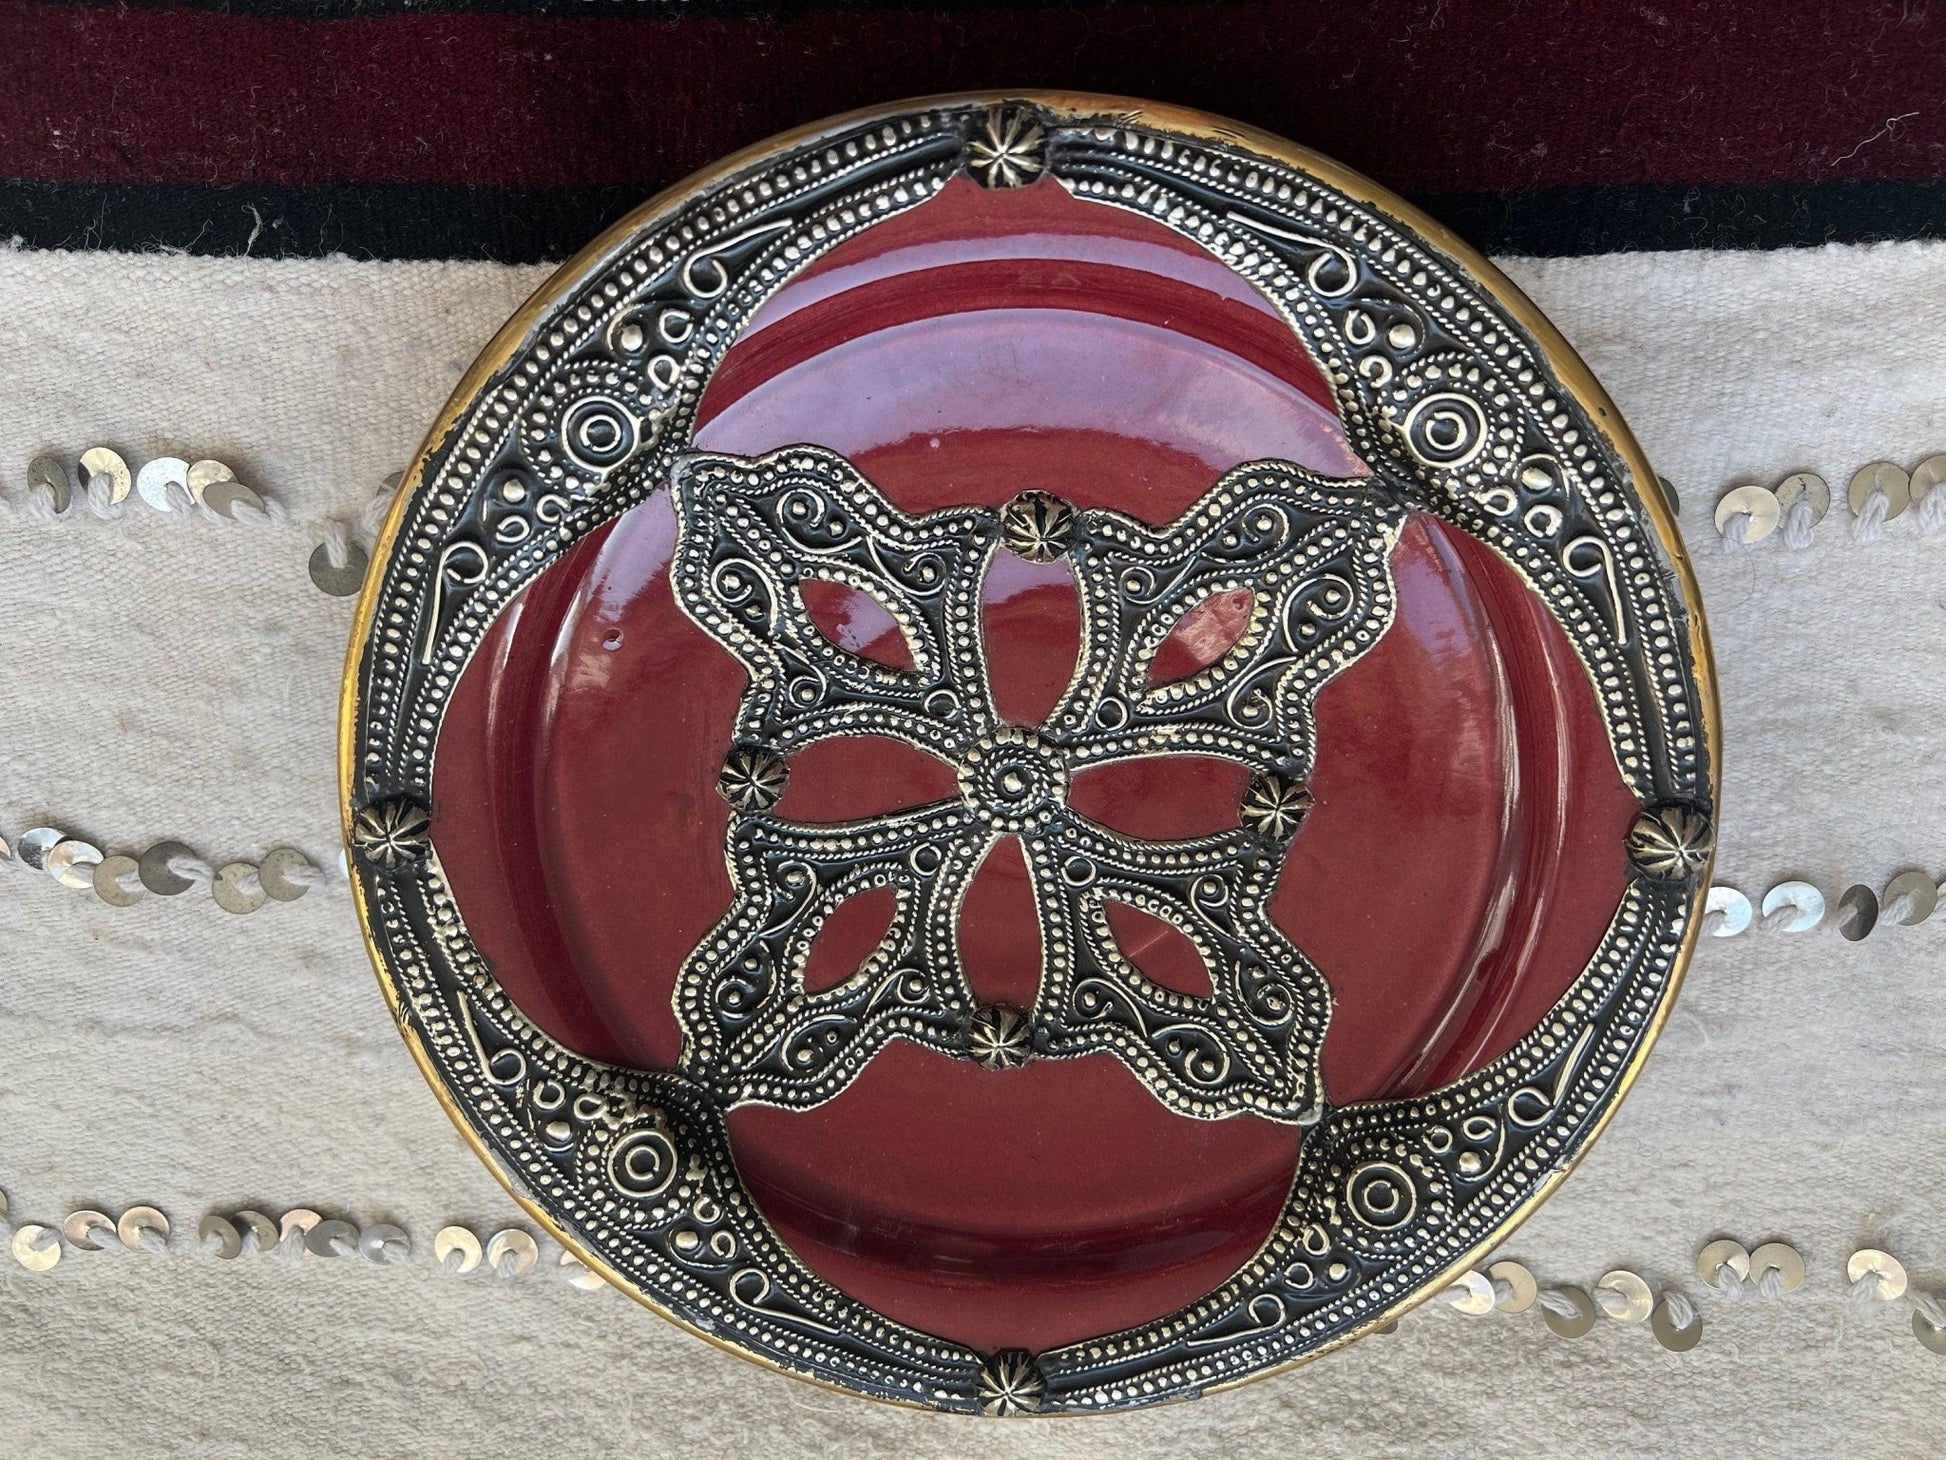 Handmade ceramic Moroccan plate with metal details